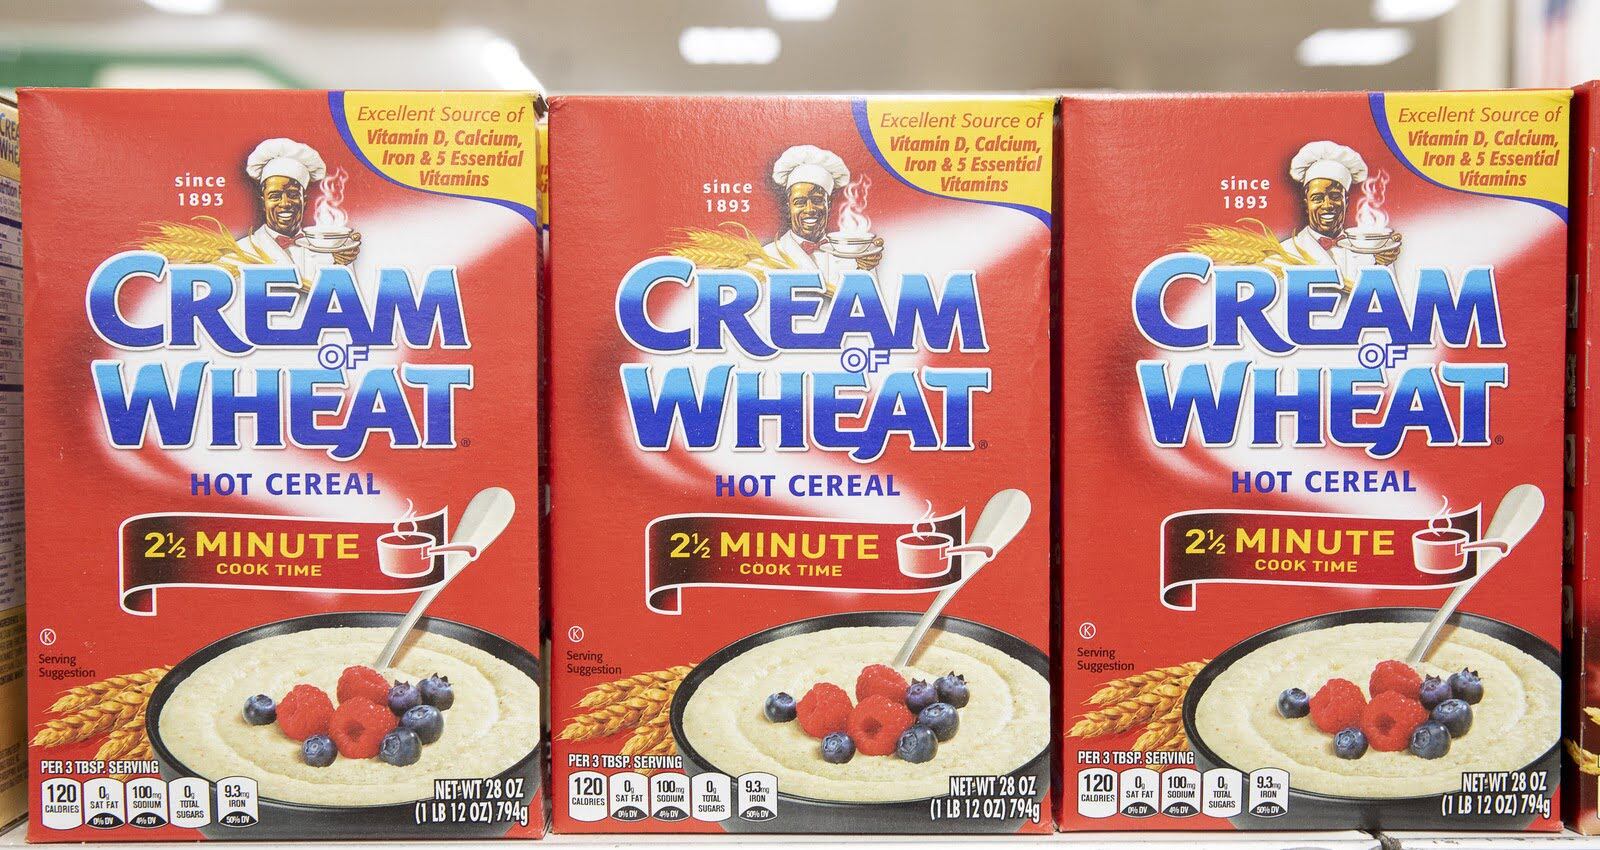 How To Store Cream Of Wheat